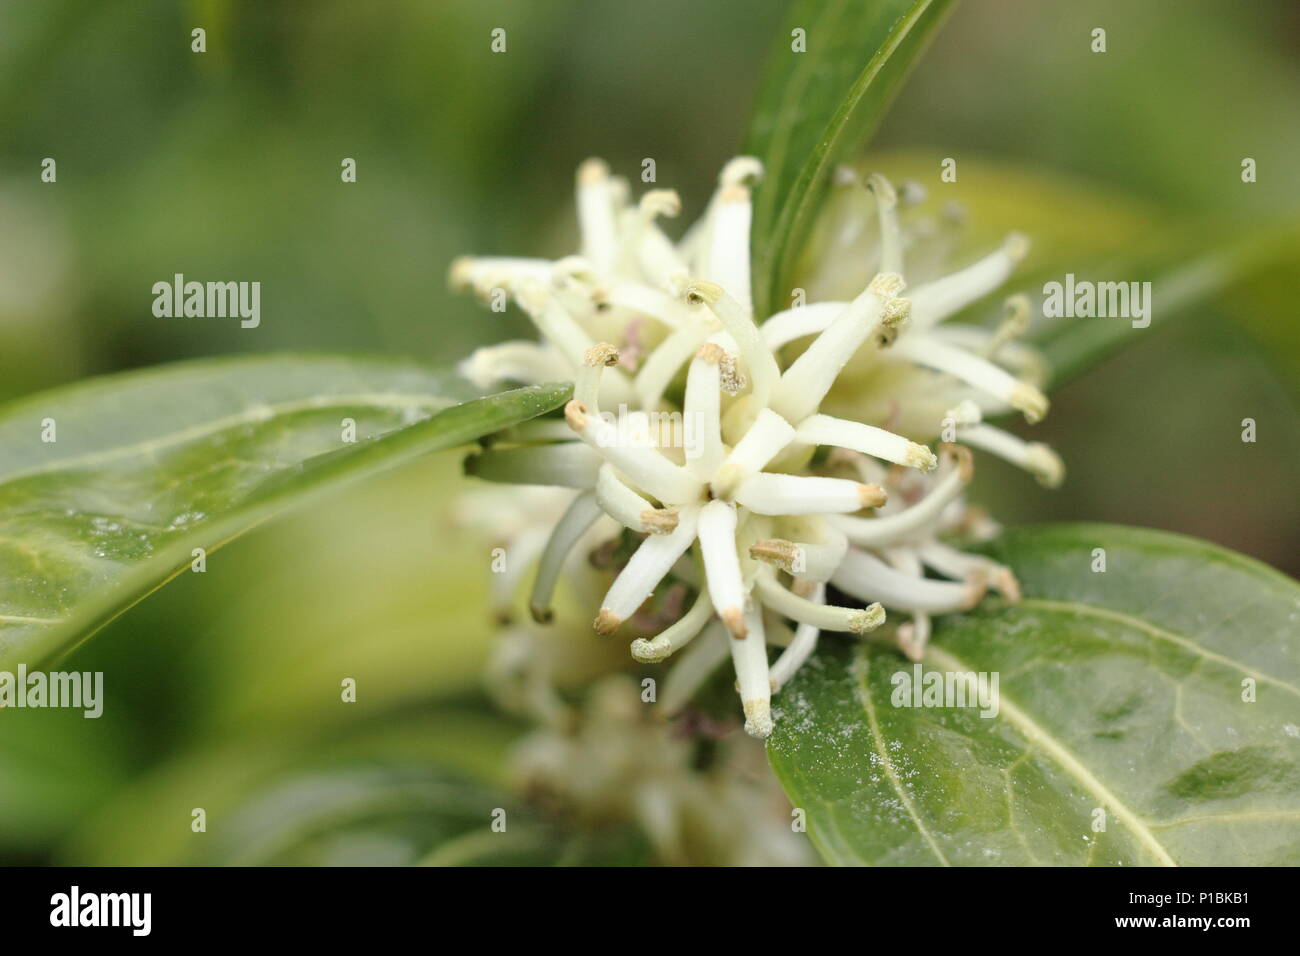 Sarcococca wallichii. Fragrant flowers of Sarcococca wallichii, also called Christmas box or Sweet box, in flower in a winter garden, UK Stock Photo